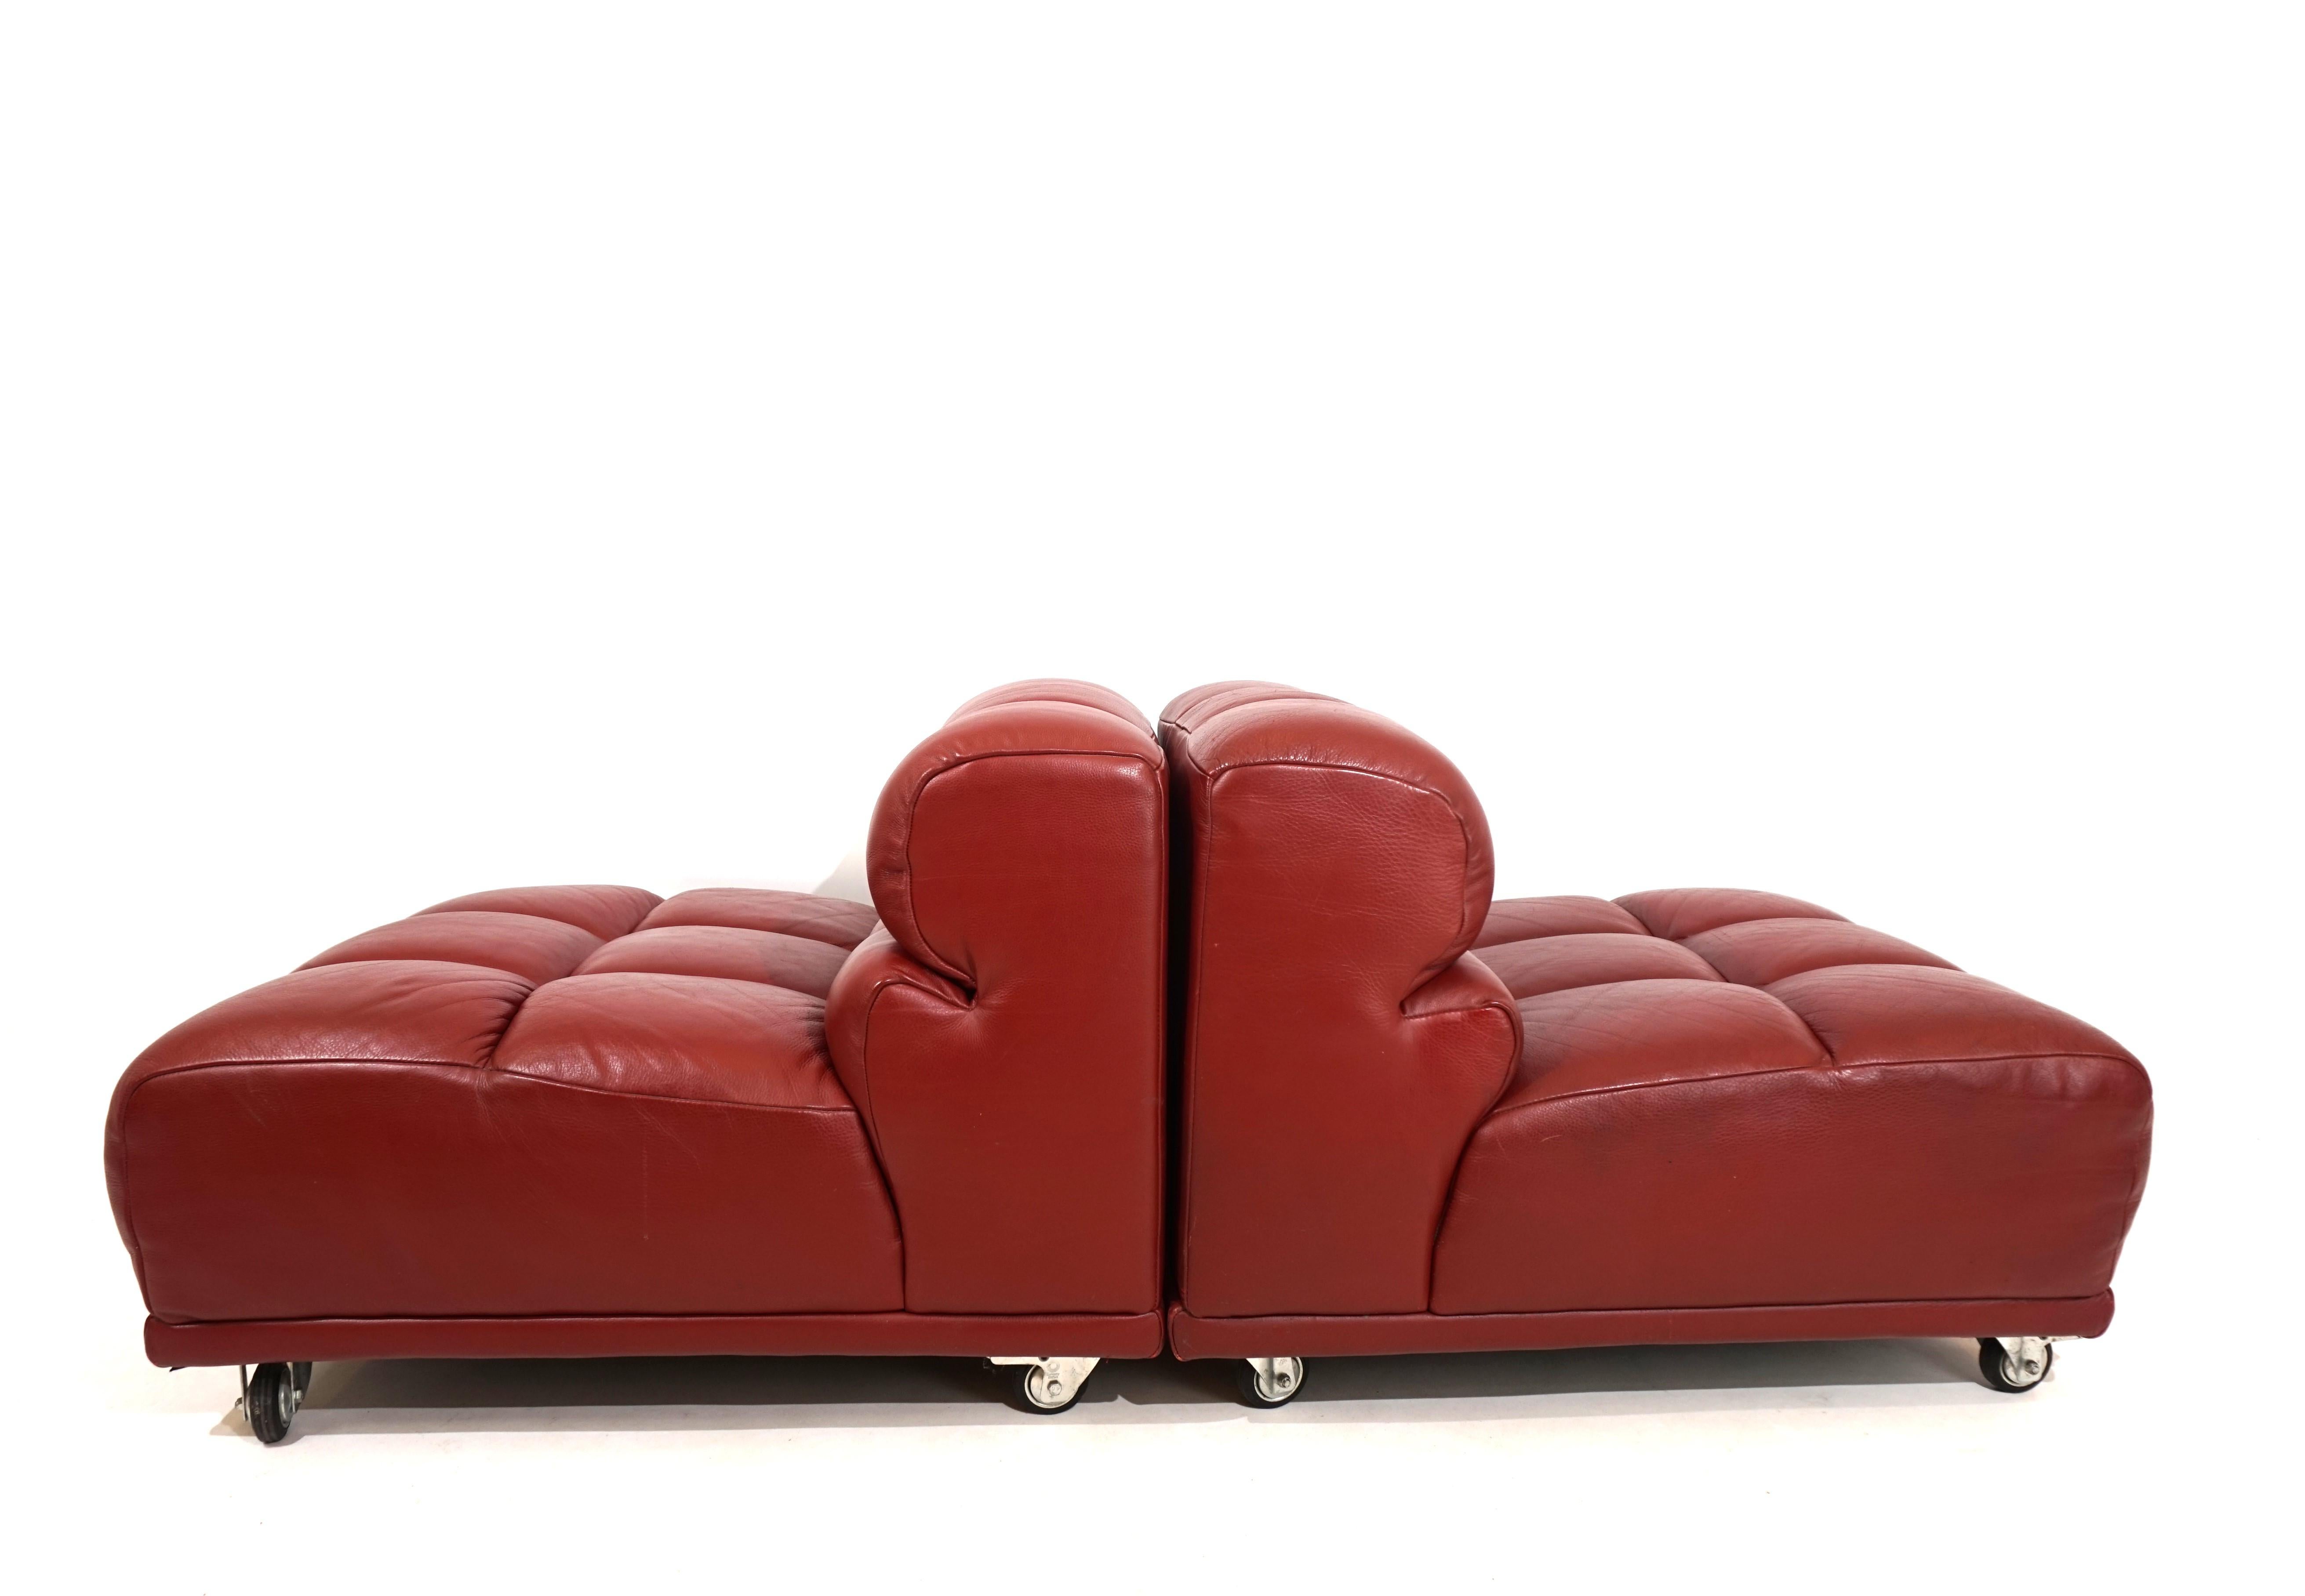 The set of 2 modular armchairs comes in fantastic condition. The leather is a very high quality, thick and at the same time soft quality. The seams are of high quality. The lines with the deep cuts in the cassettes indicate an Italian manufacturer.